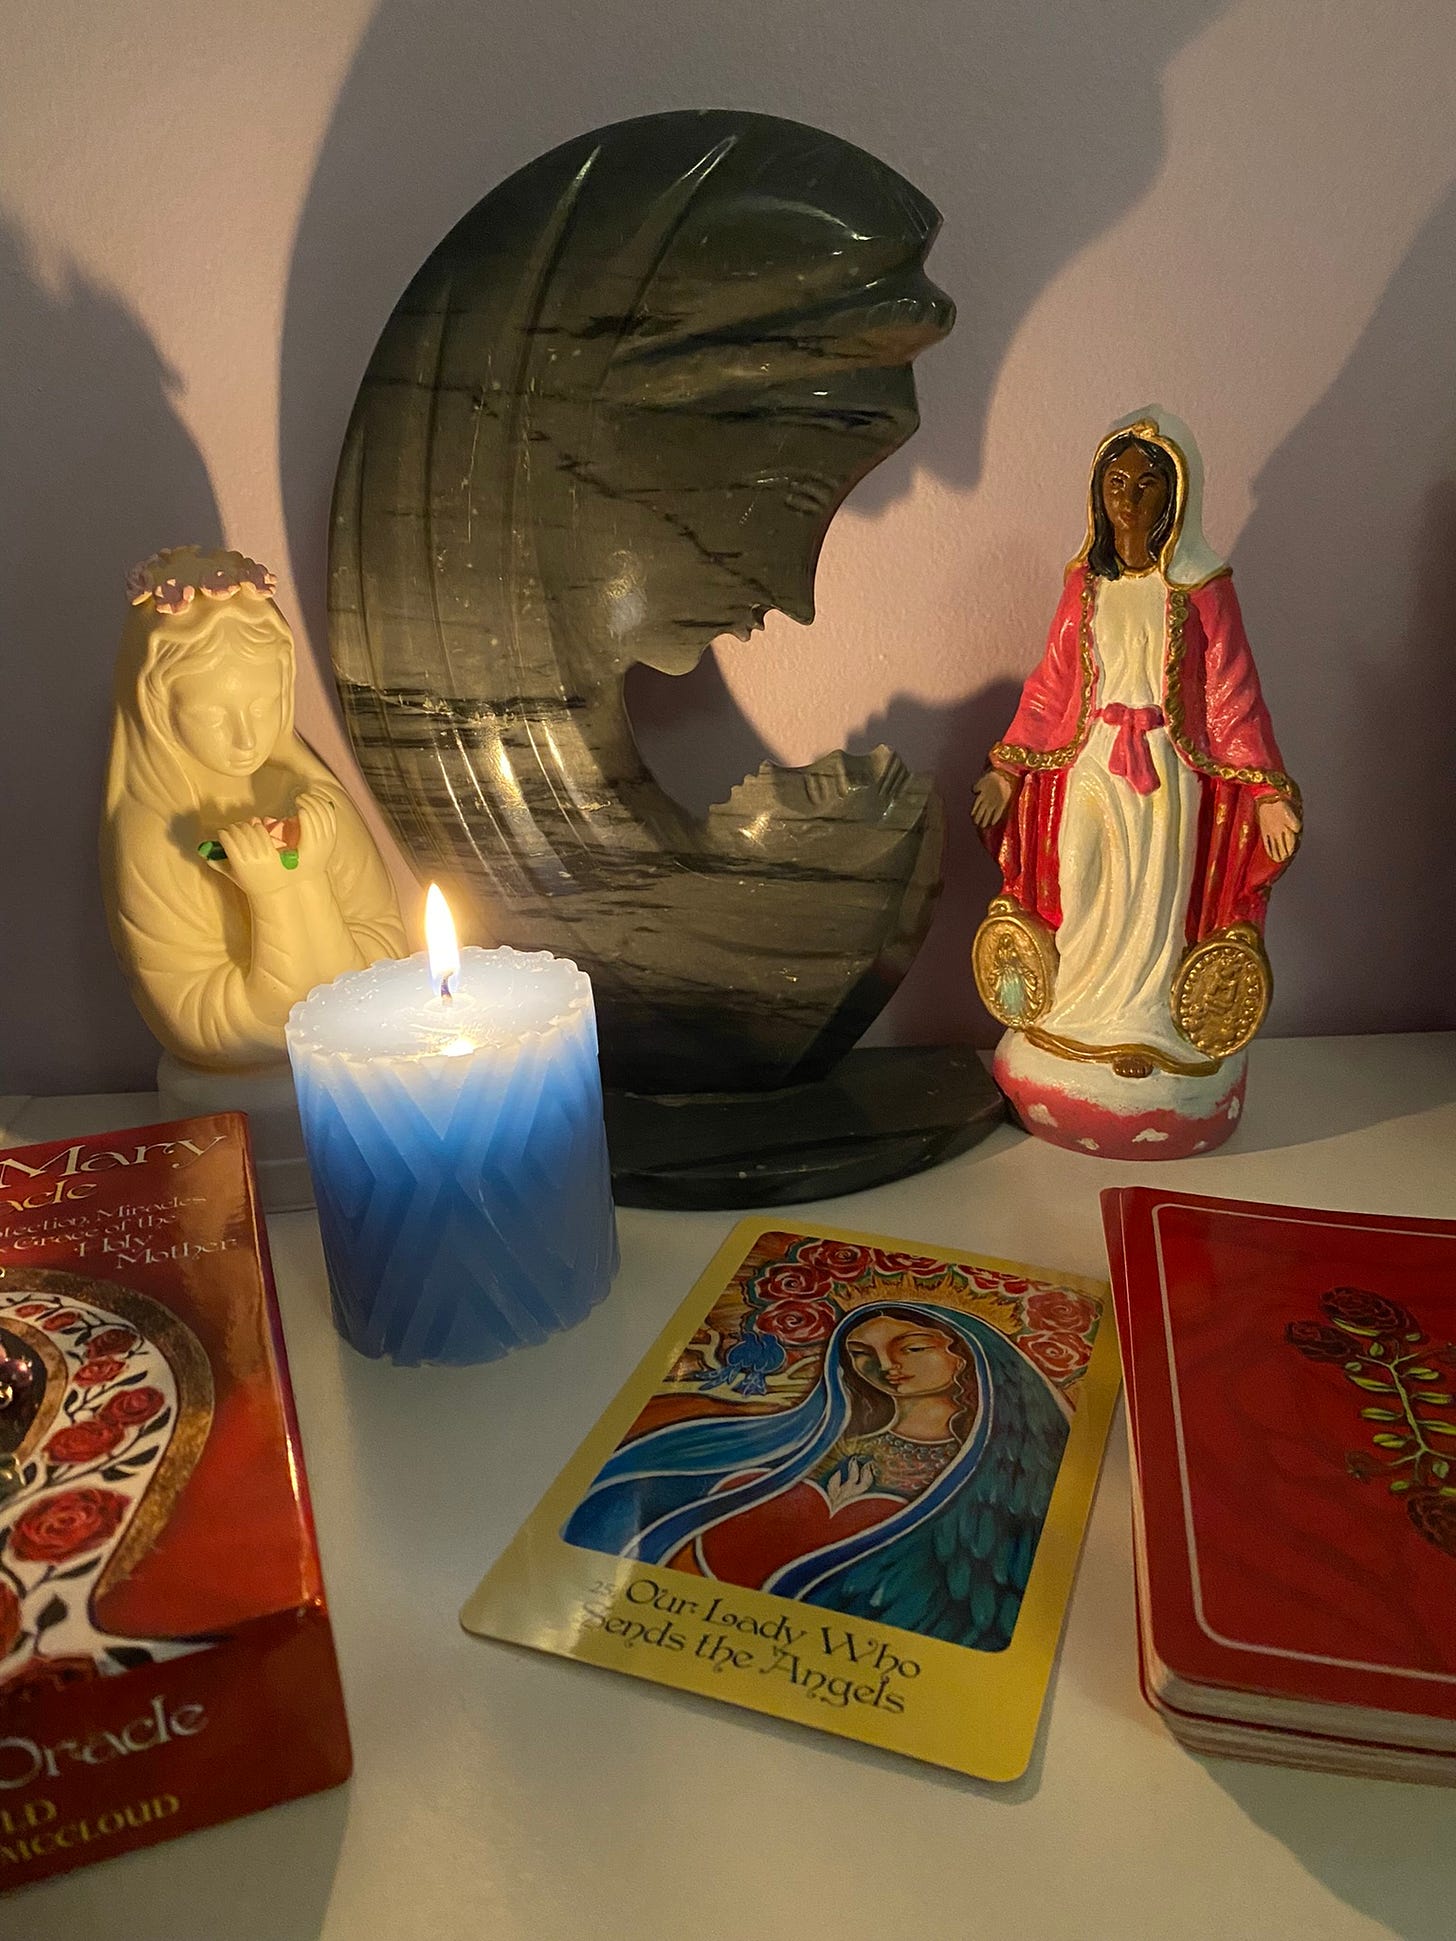 Home shrine to Mary with a candle in the foreground